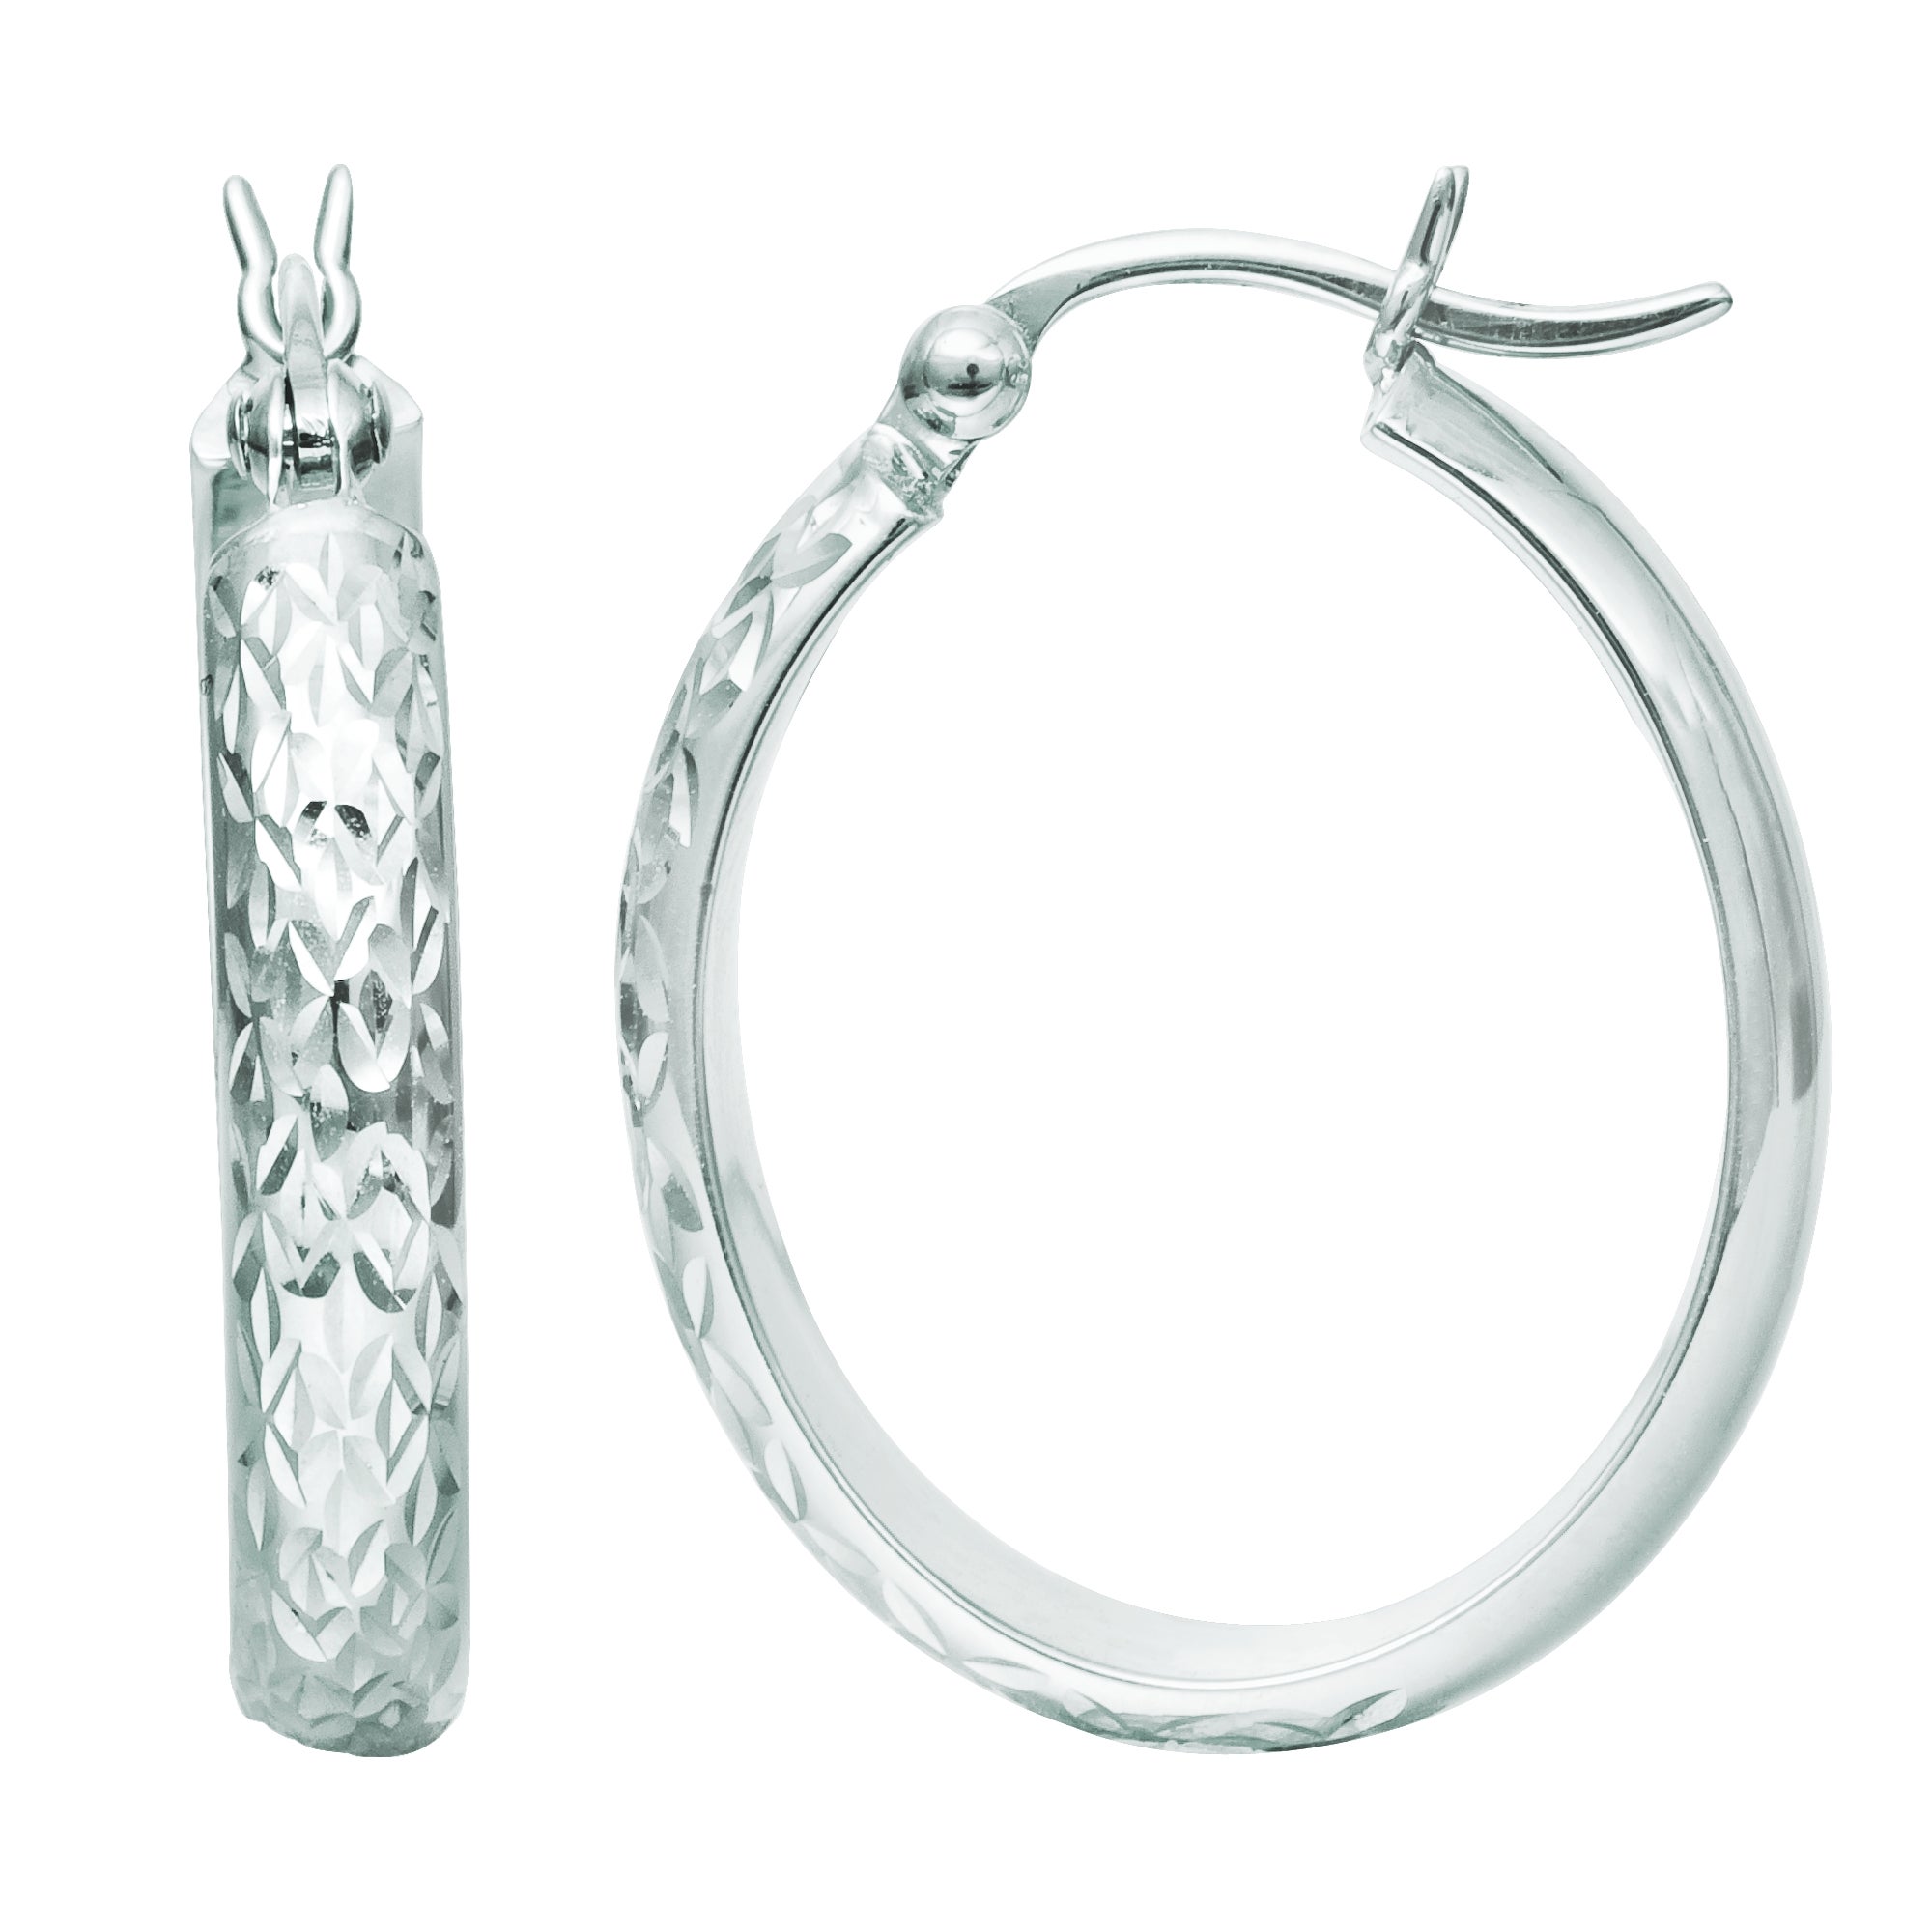 14K White Gold Hammered Polished Oval Hoop Earrings